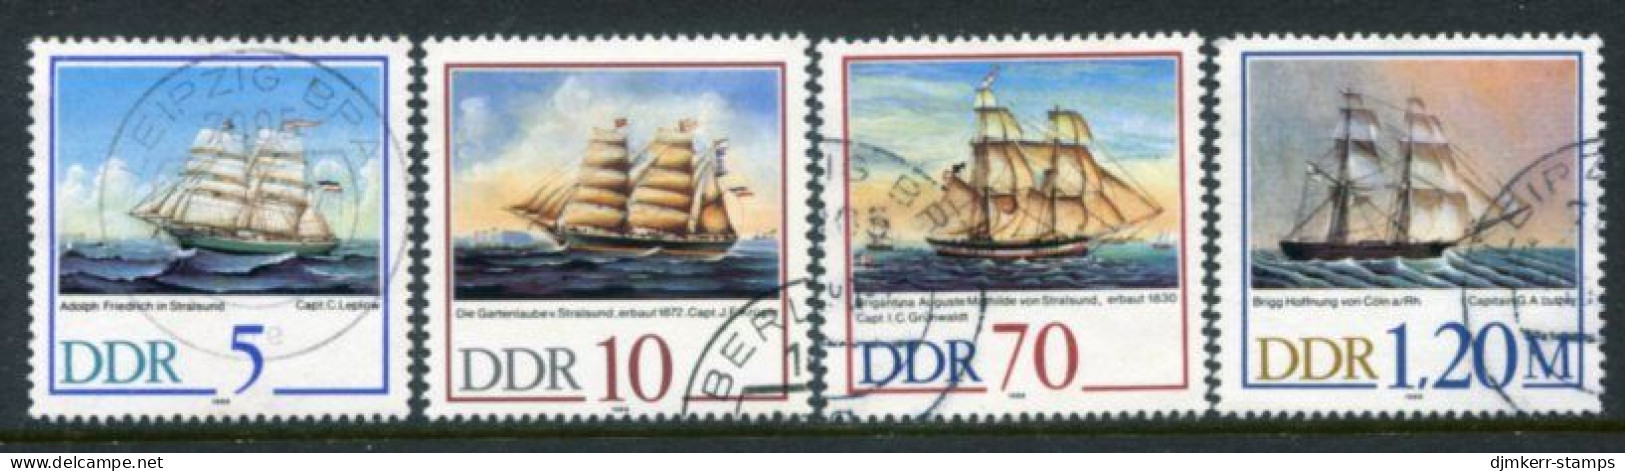 EAST GERMANY / DDR 1988 Sailing Ships Used .  Michel 3198-201 - Usati